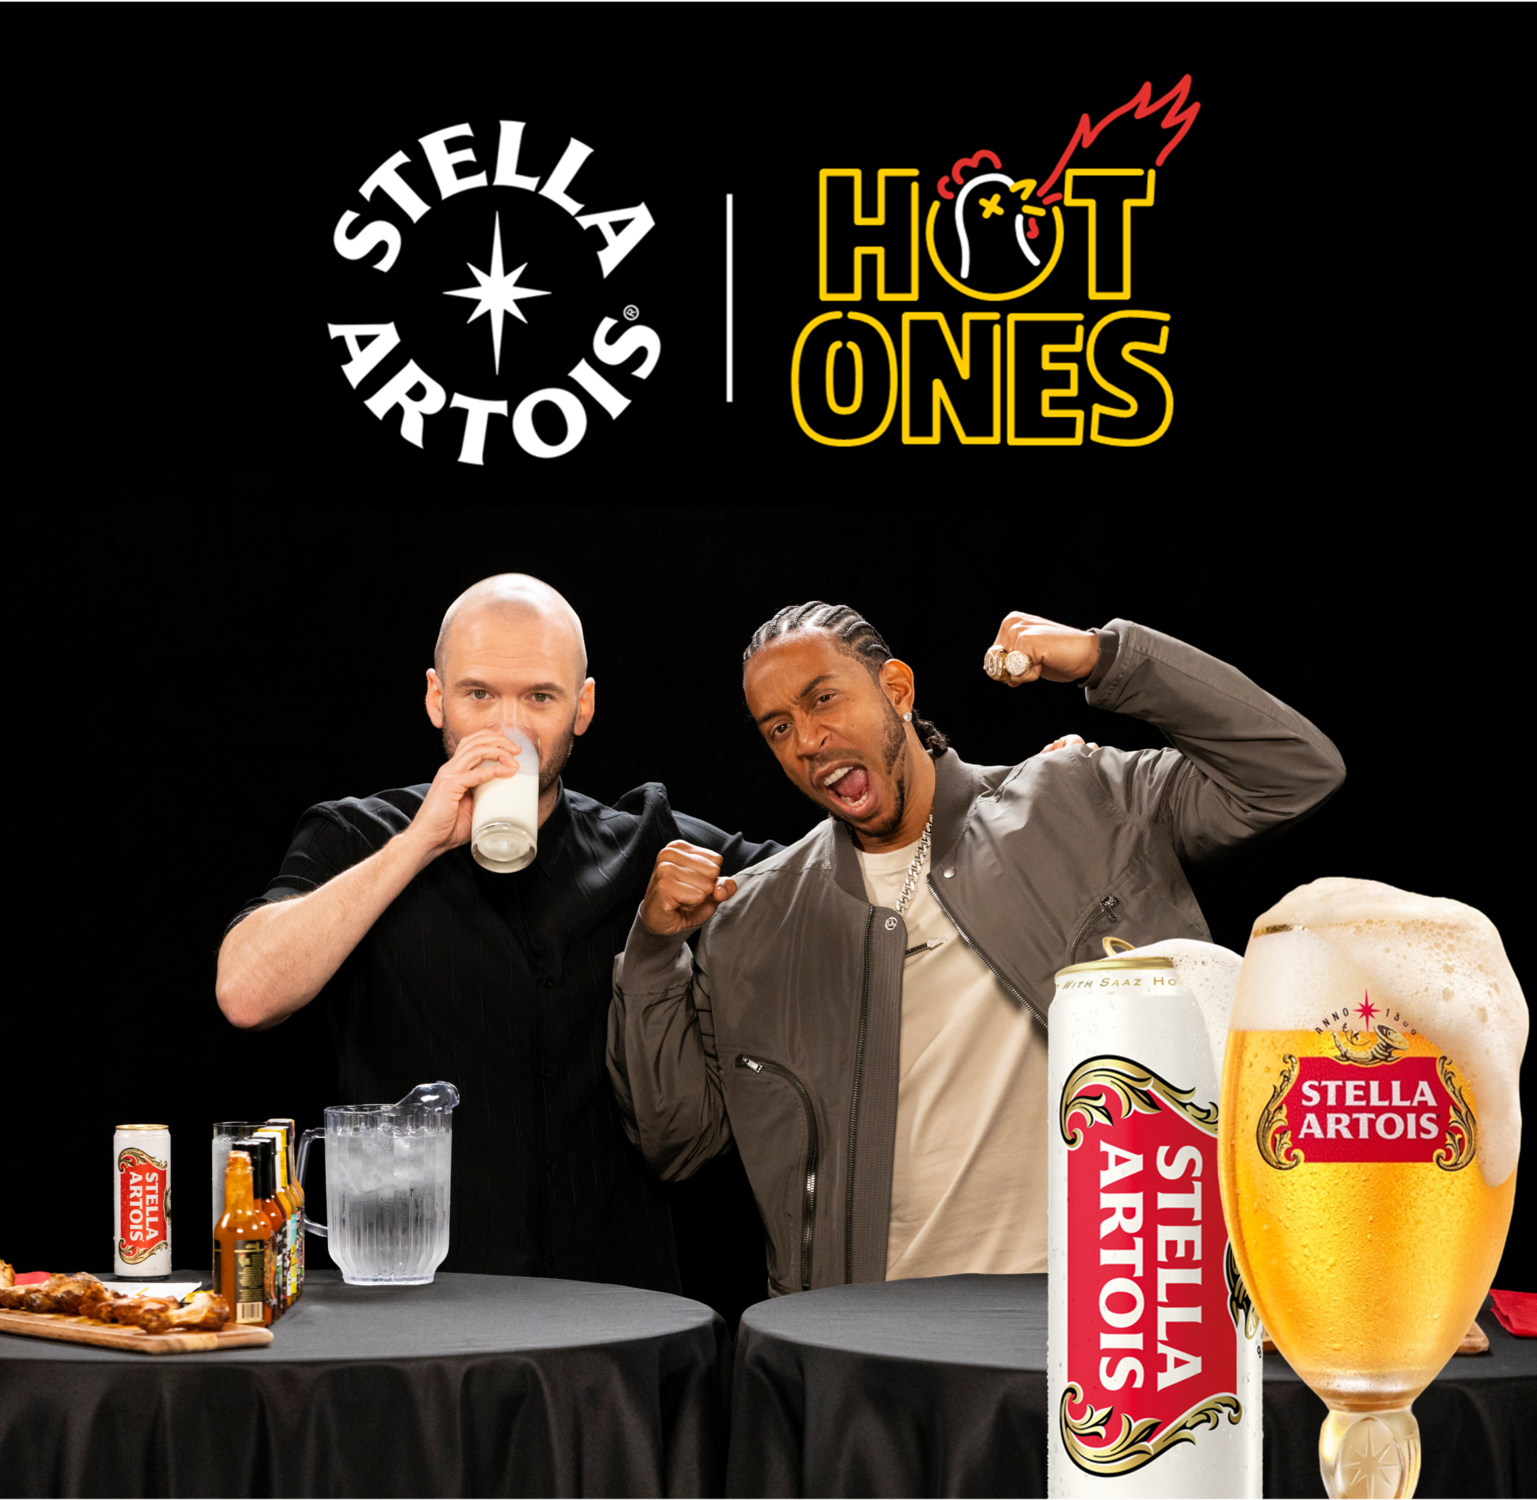 Stella Artois and First We Feast’s HOT ONES™ Are Turning Up the Heat This Summer